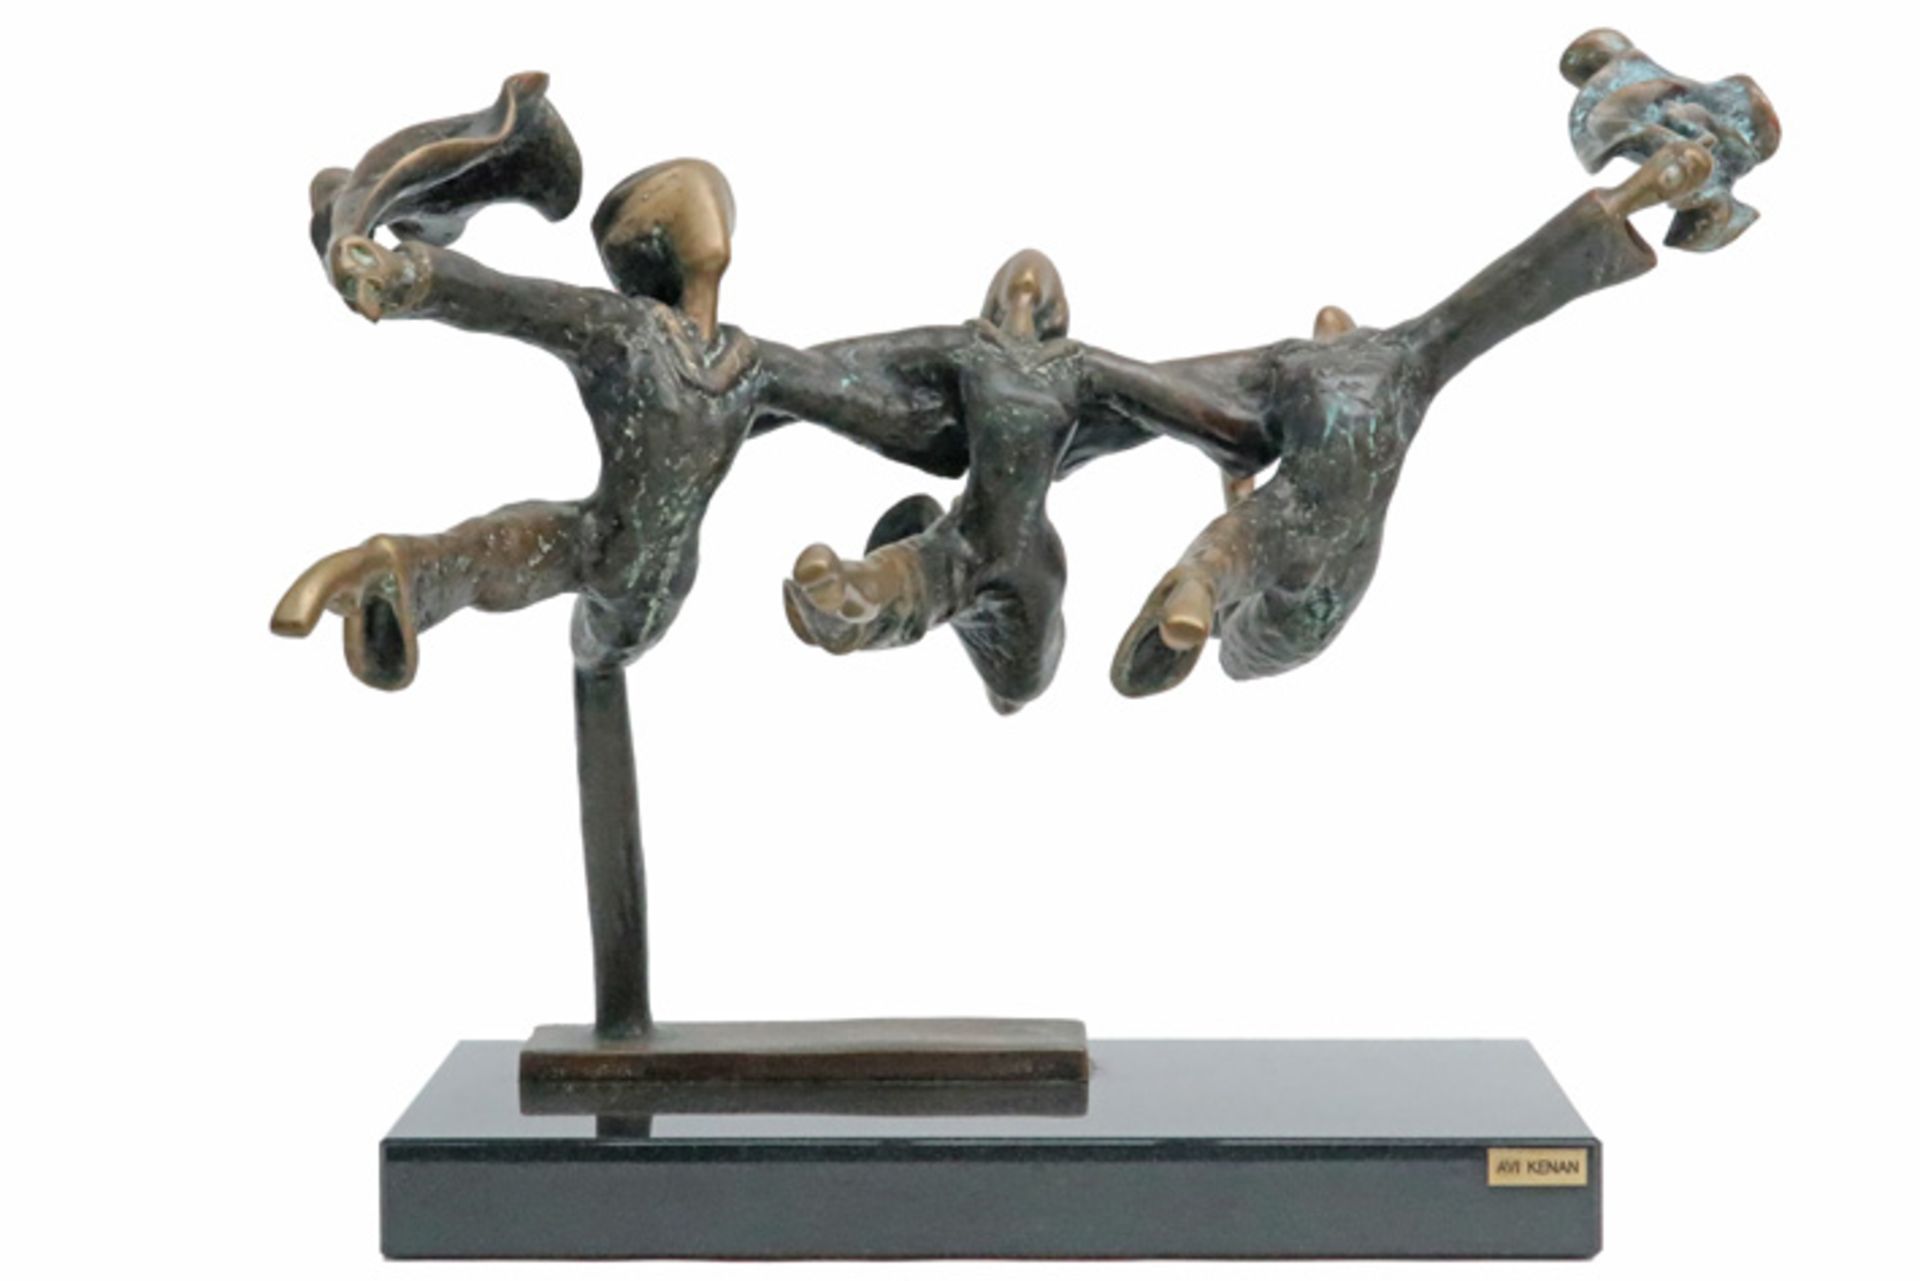 20th Cent. Avi Kenan sculpture in bronze titled "Flying Dancers" - signed and dated 1980 || AVI